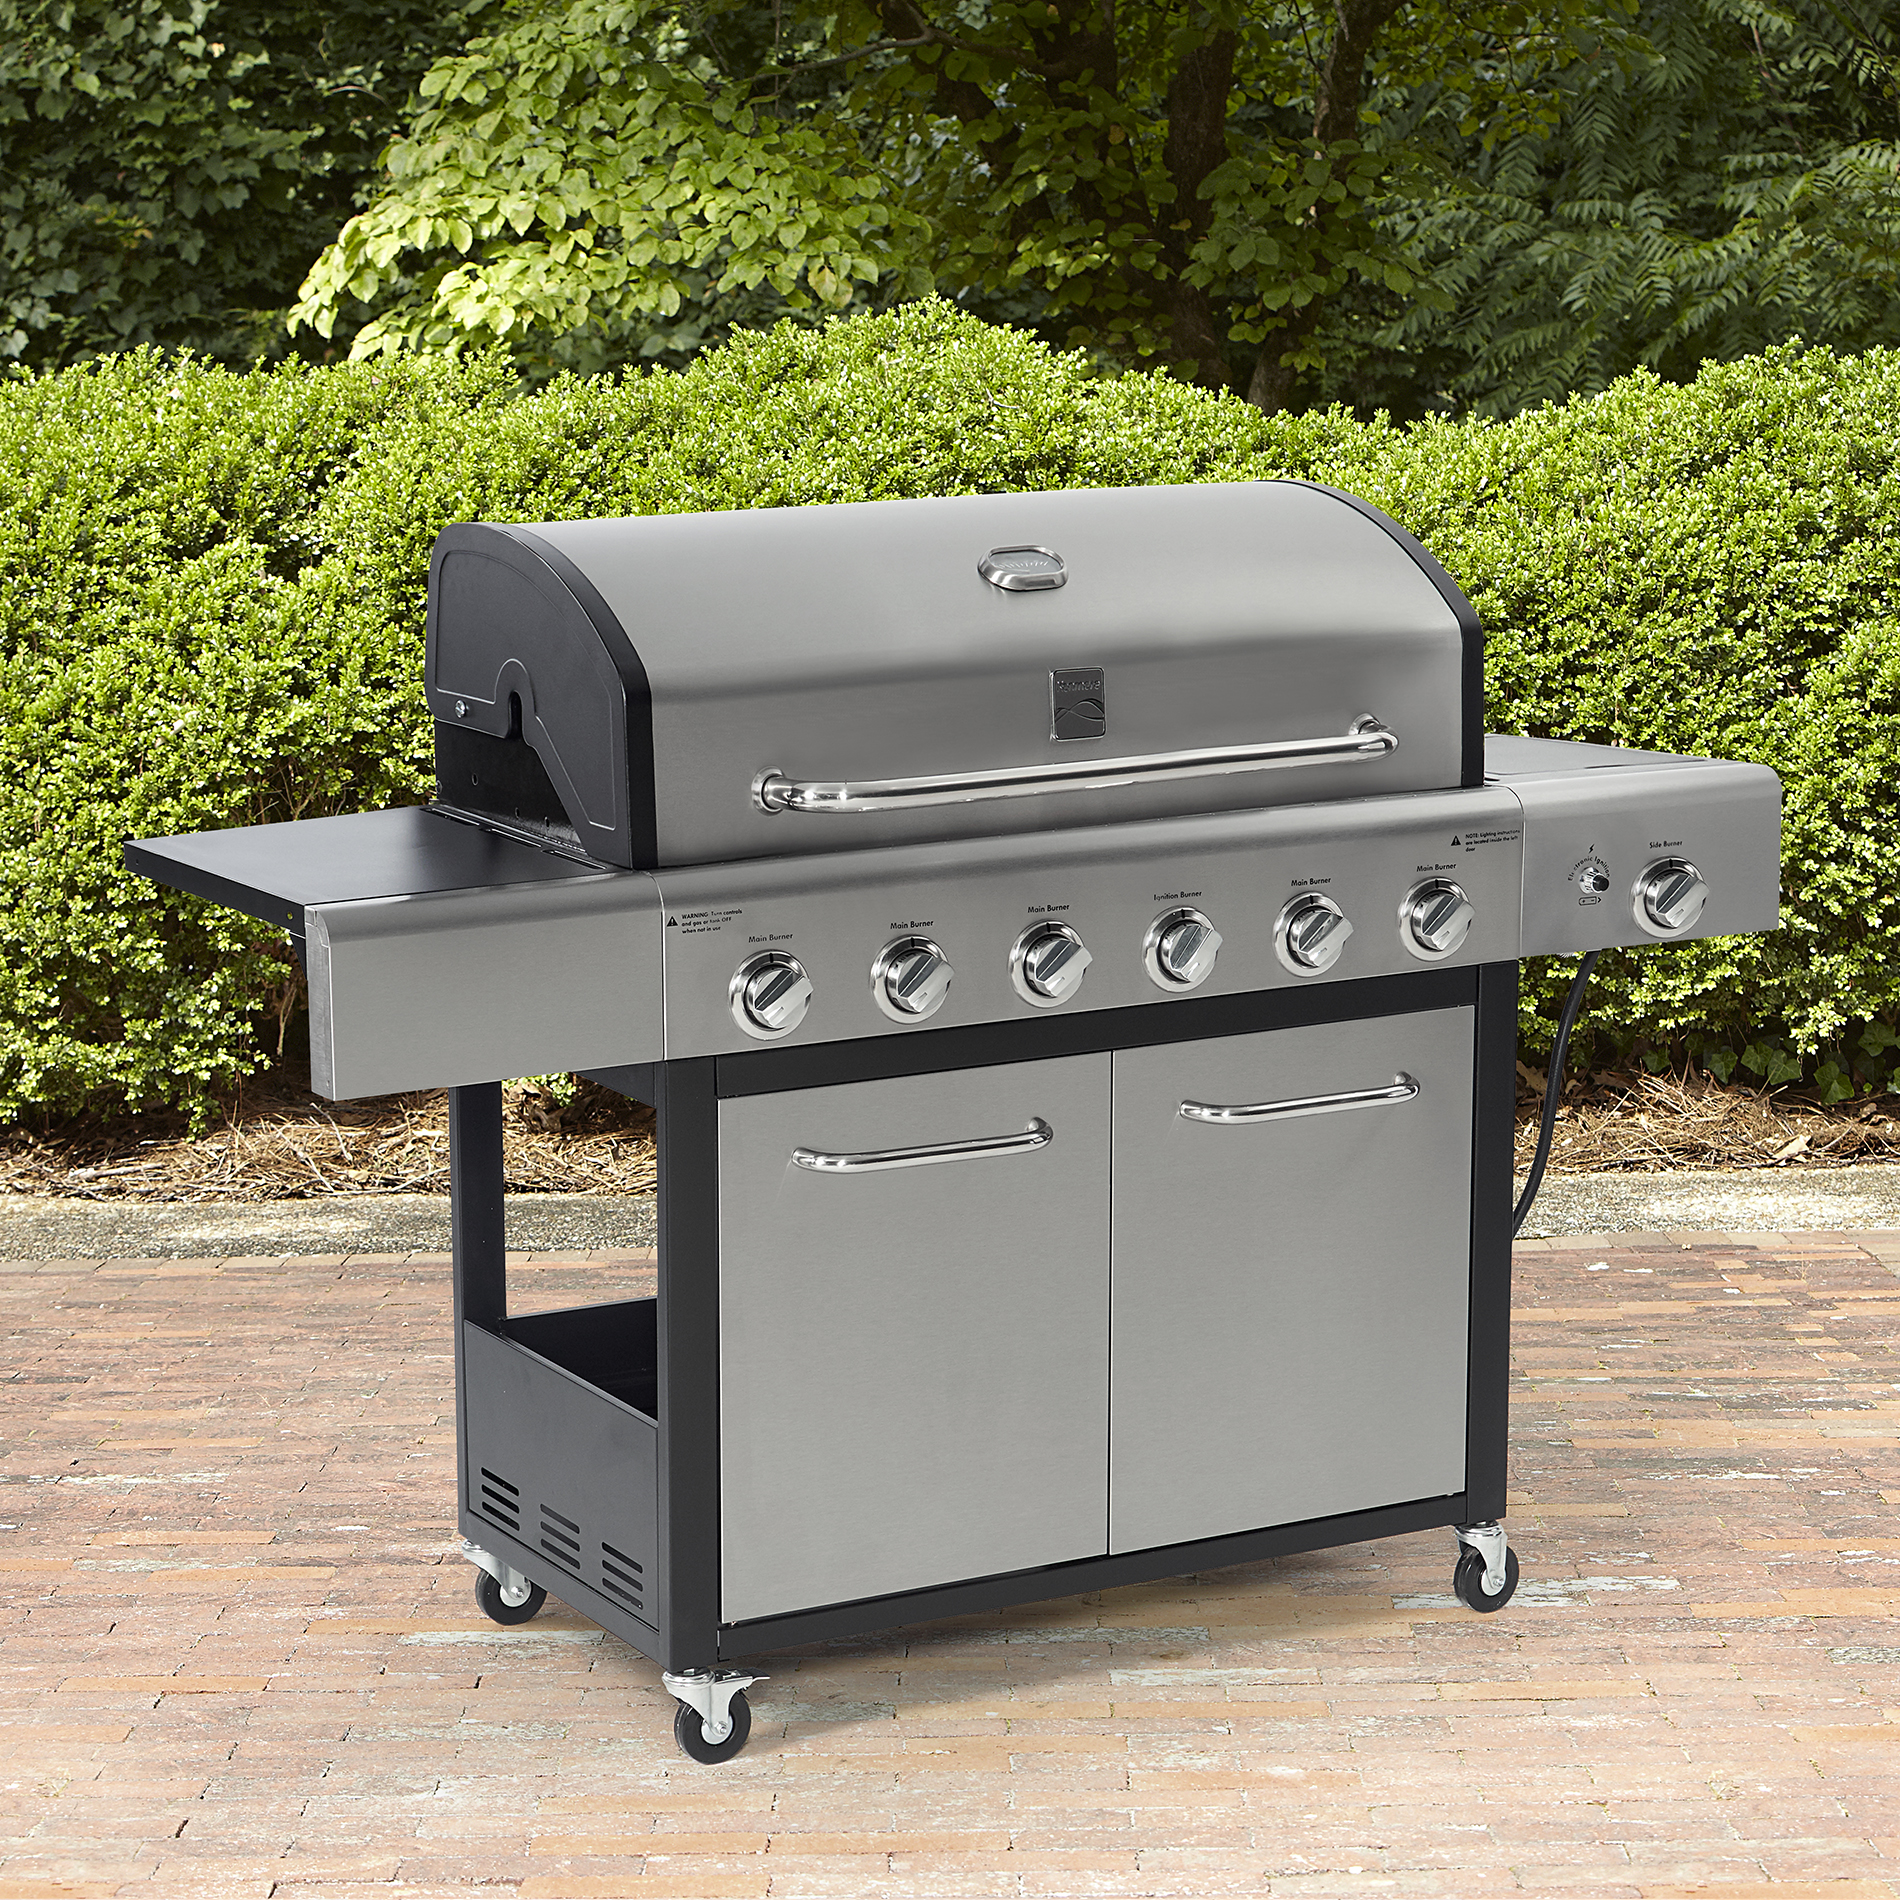 gas grills kenmore 6 burner lp gas grill with side burner and stainless steel lid KTJALXN